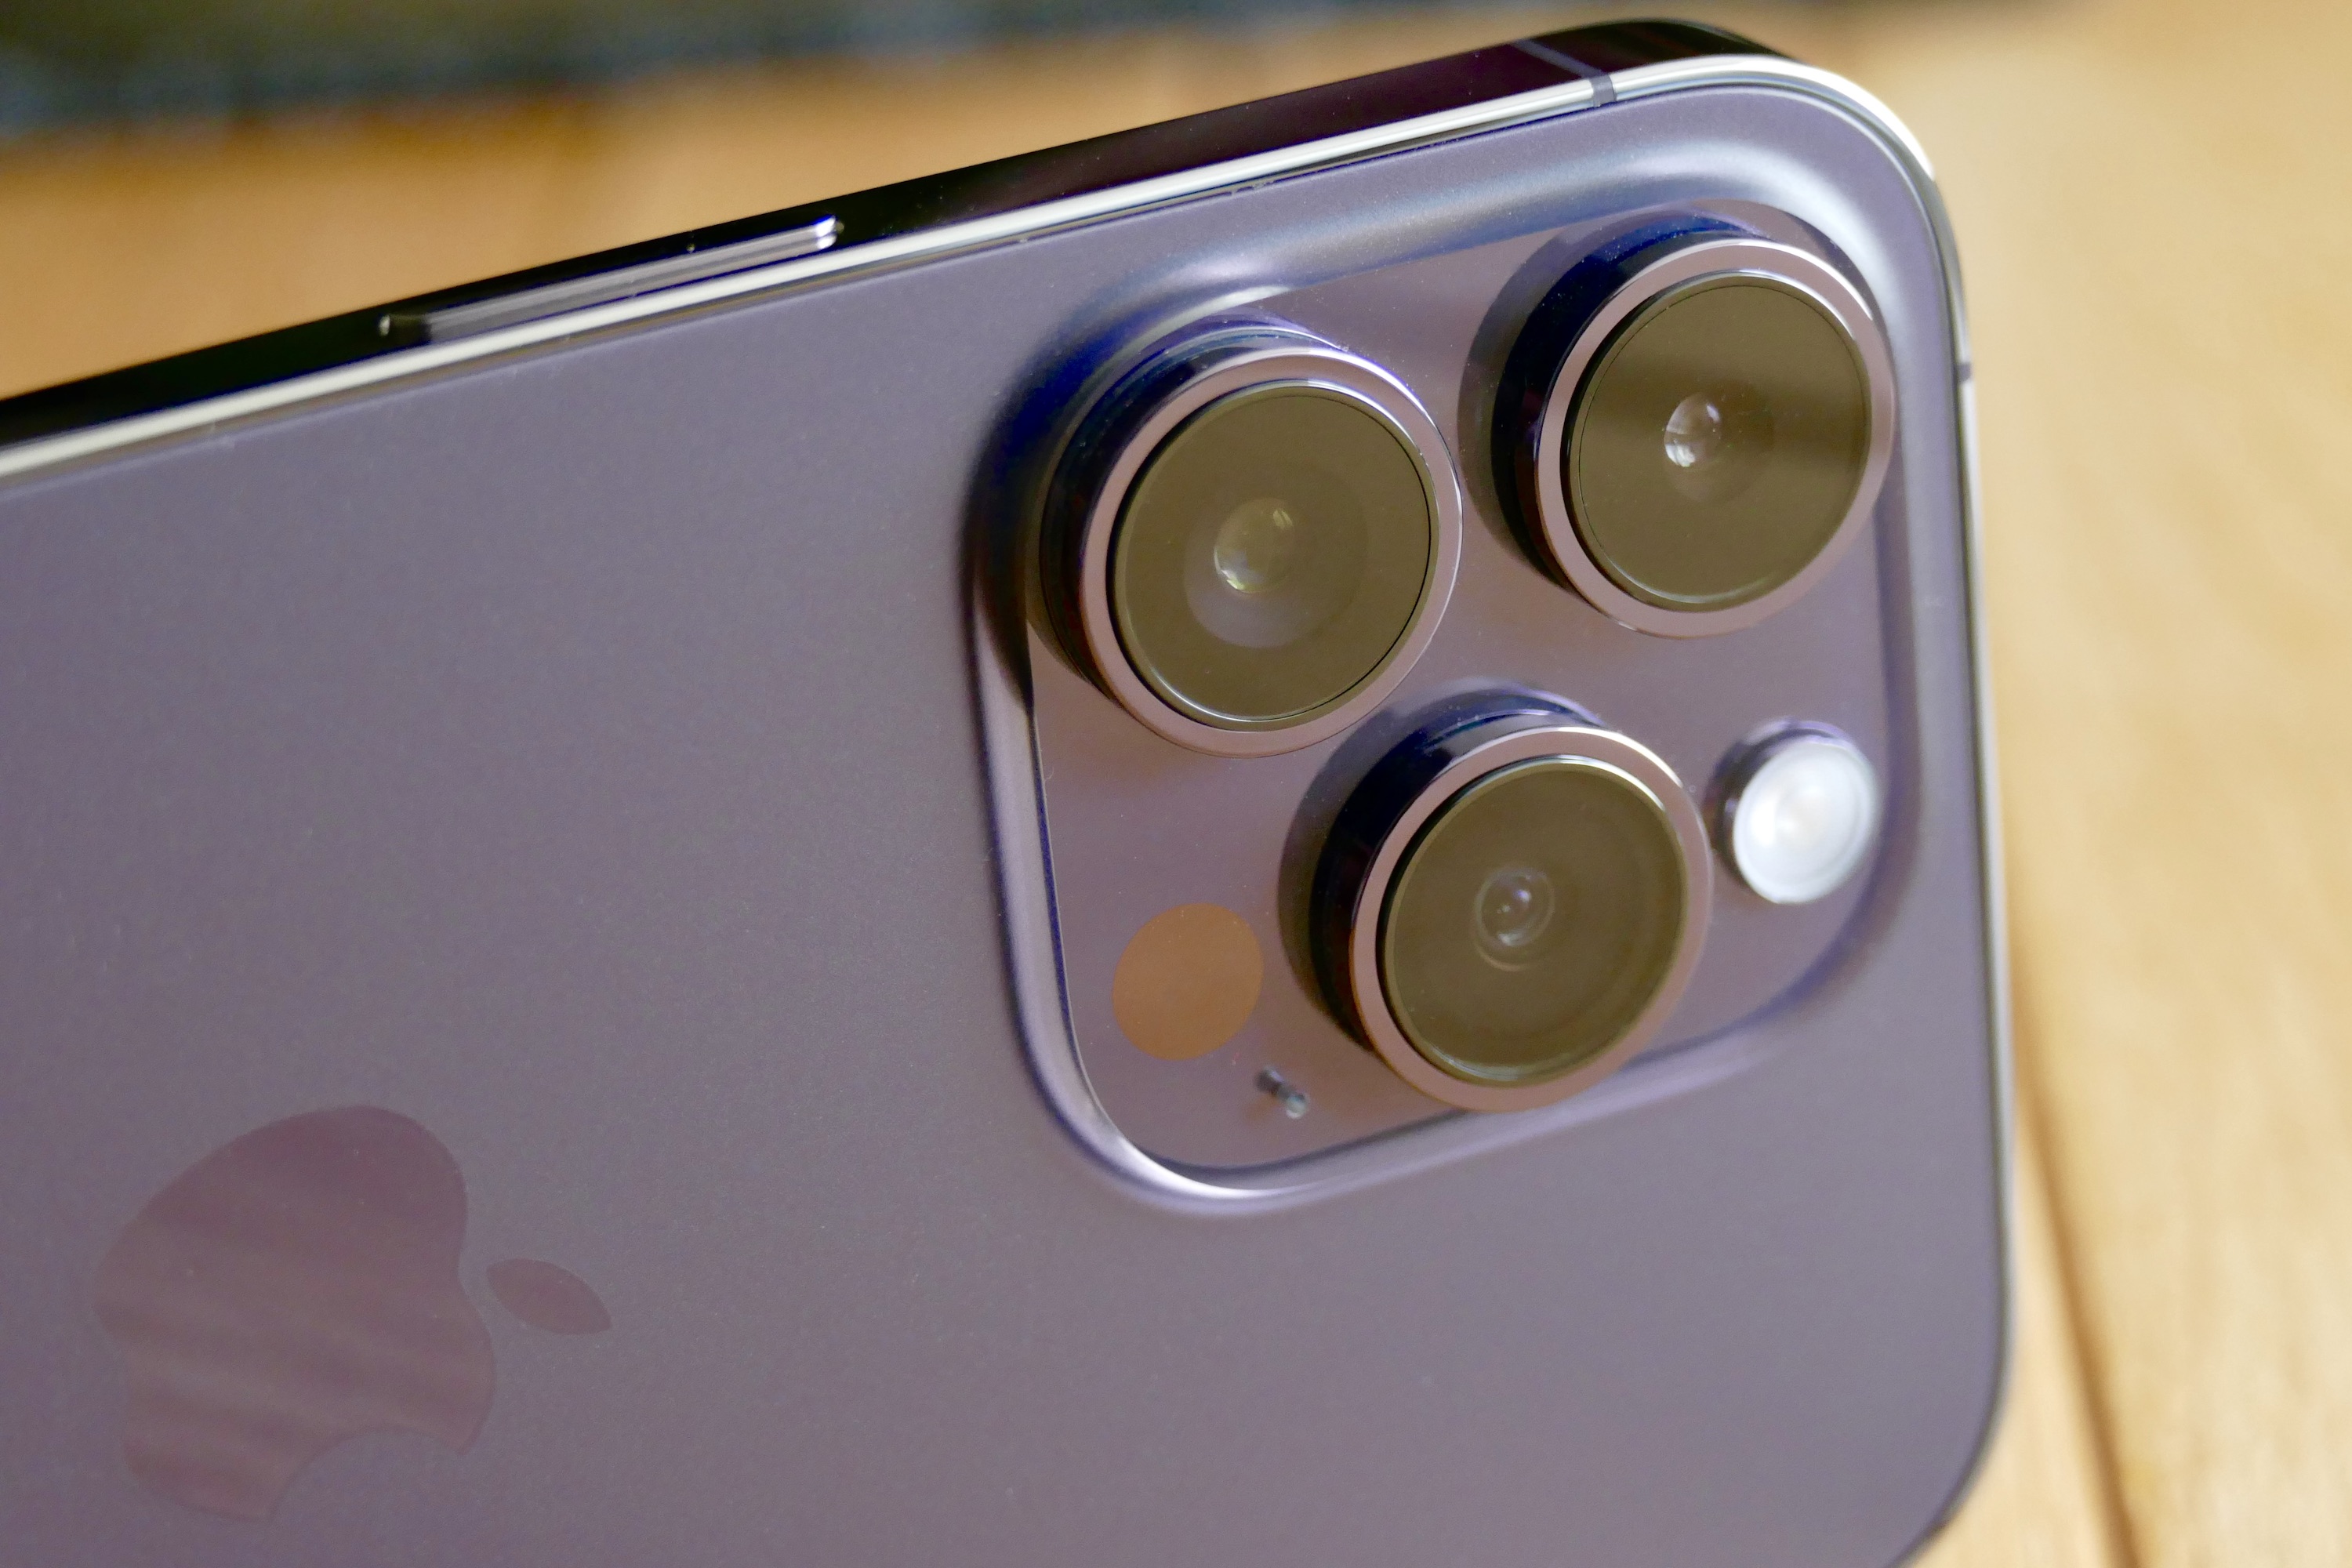 Apple iPhone 14 Pro Review: The camera phone to beat?